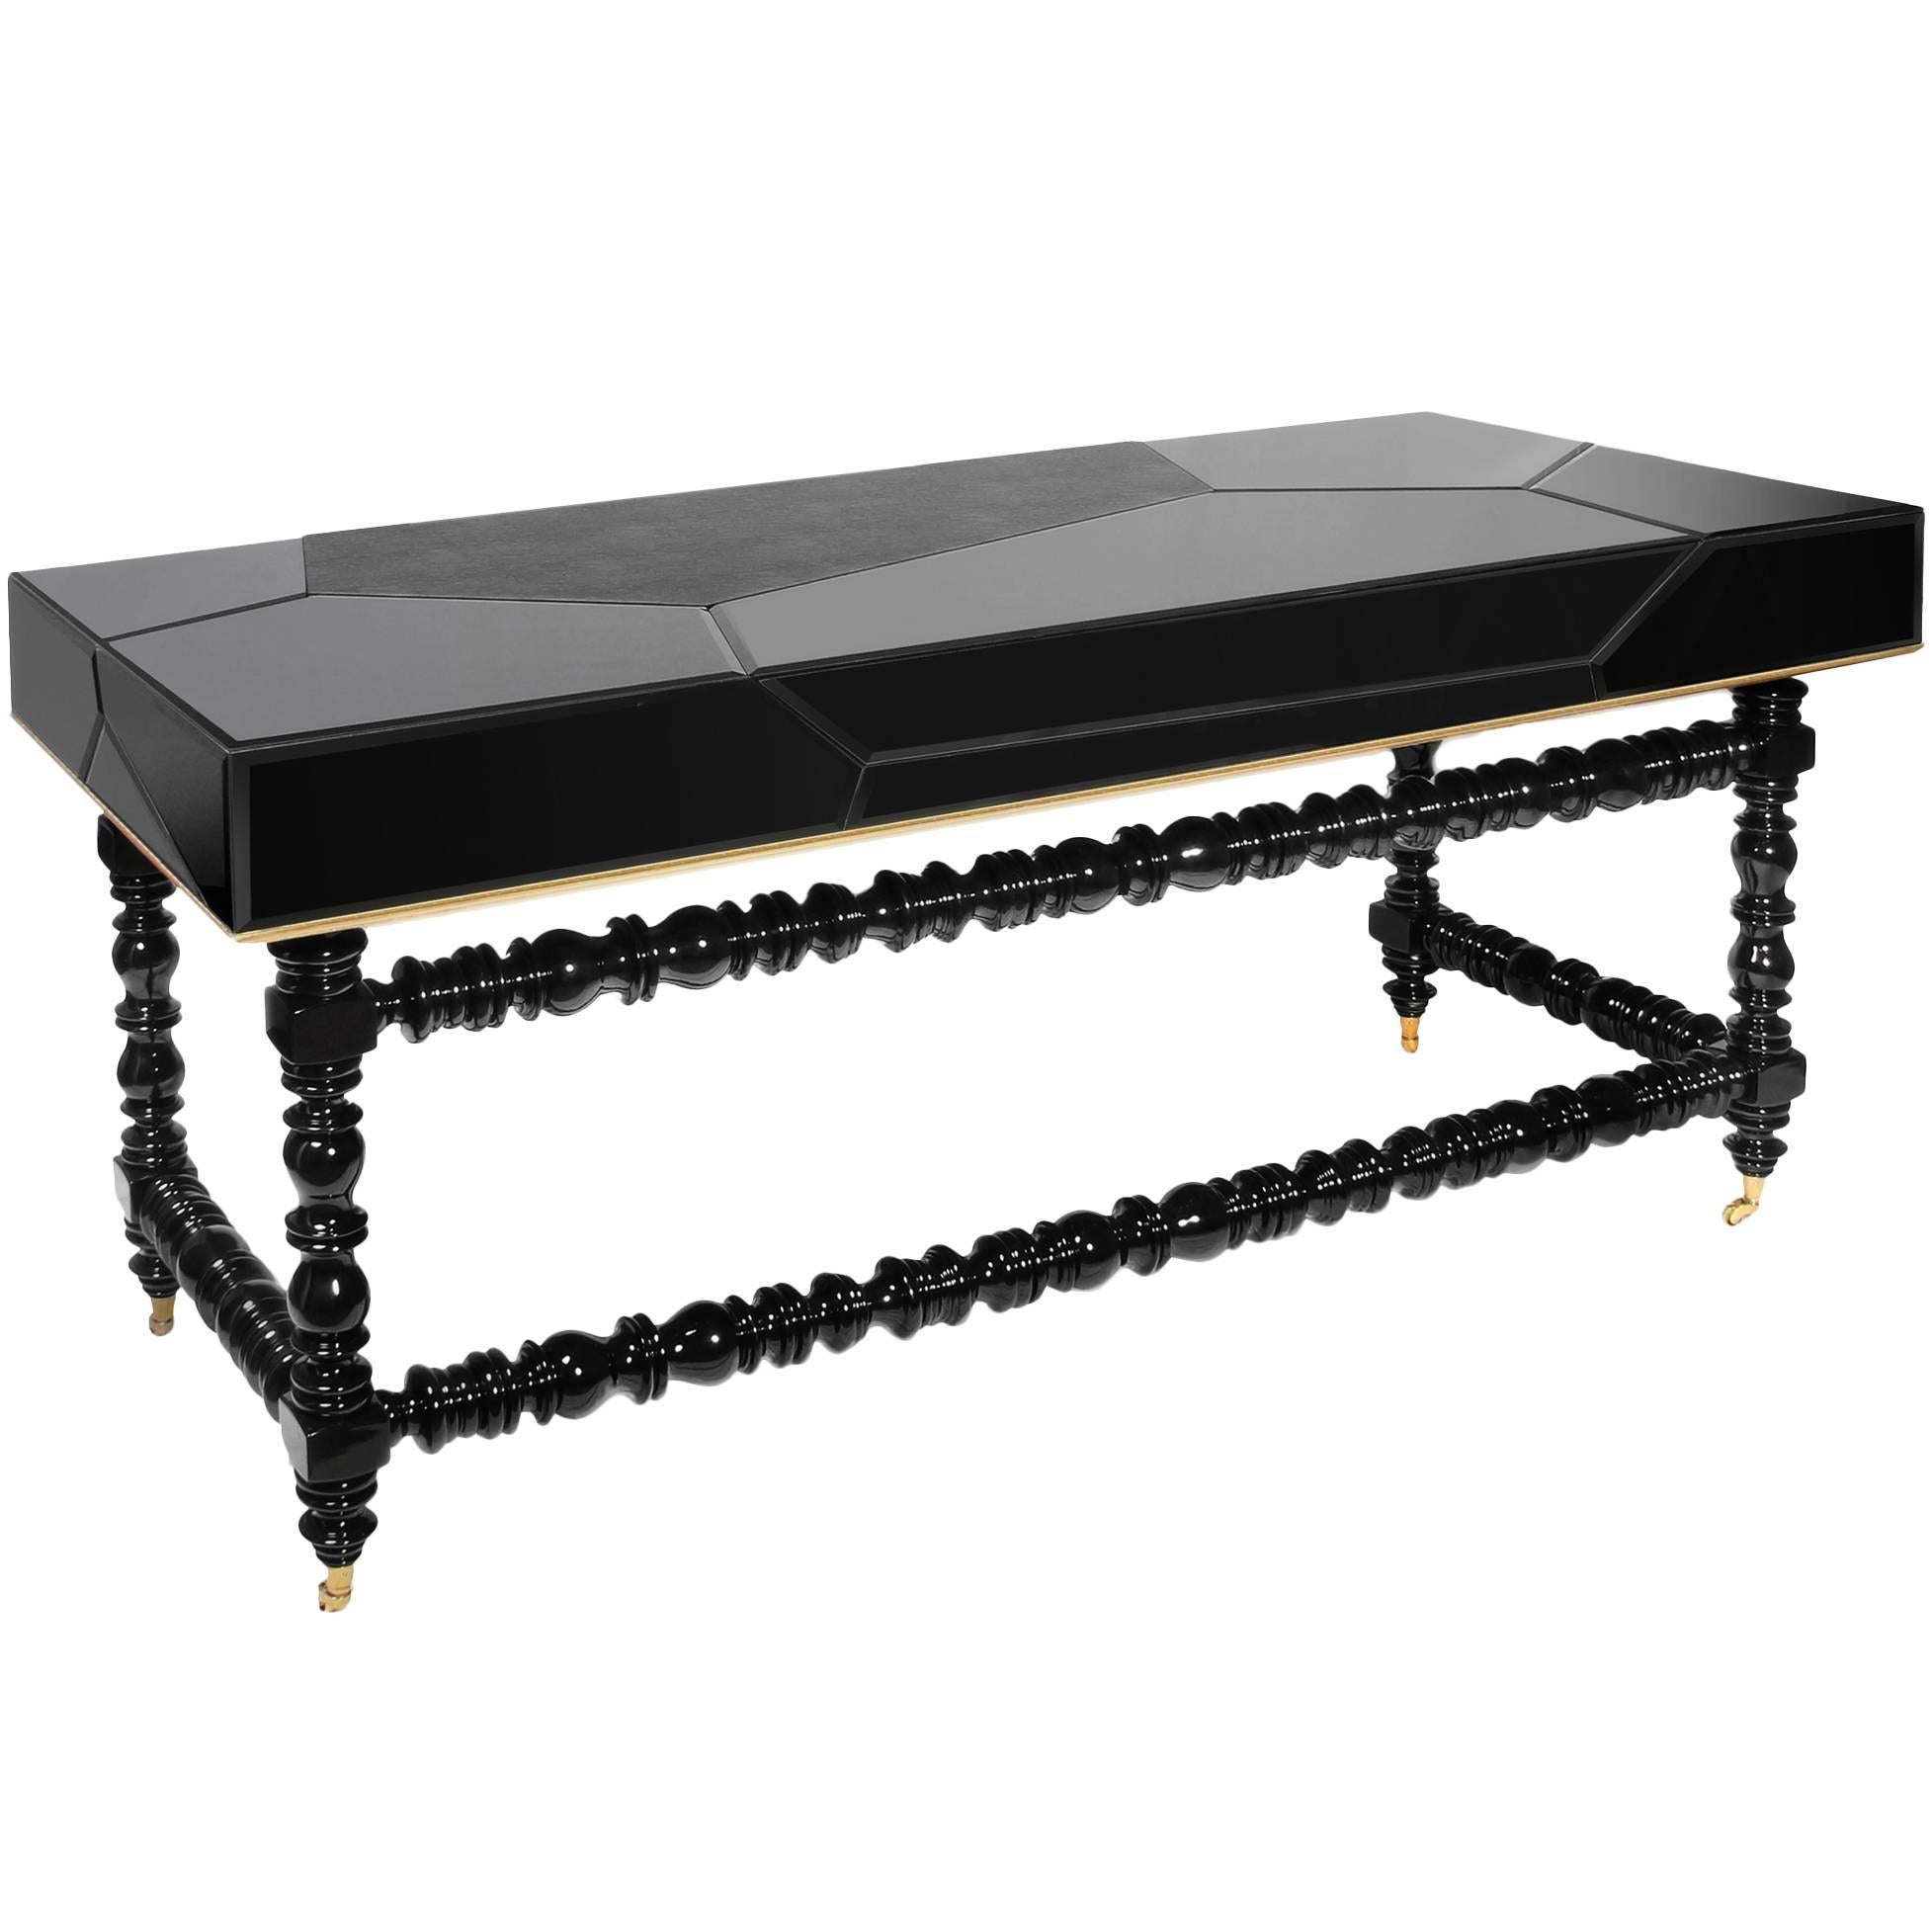 Queen Desk with Black Lacquered Mirror and Leather Top Gold Leaf Details